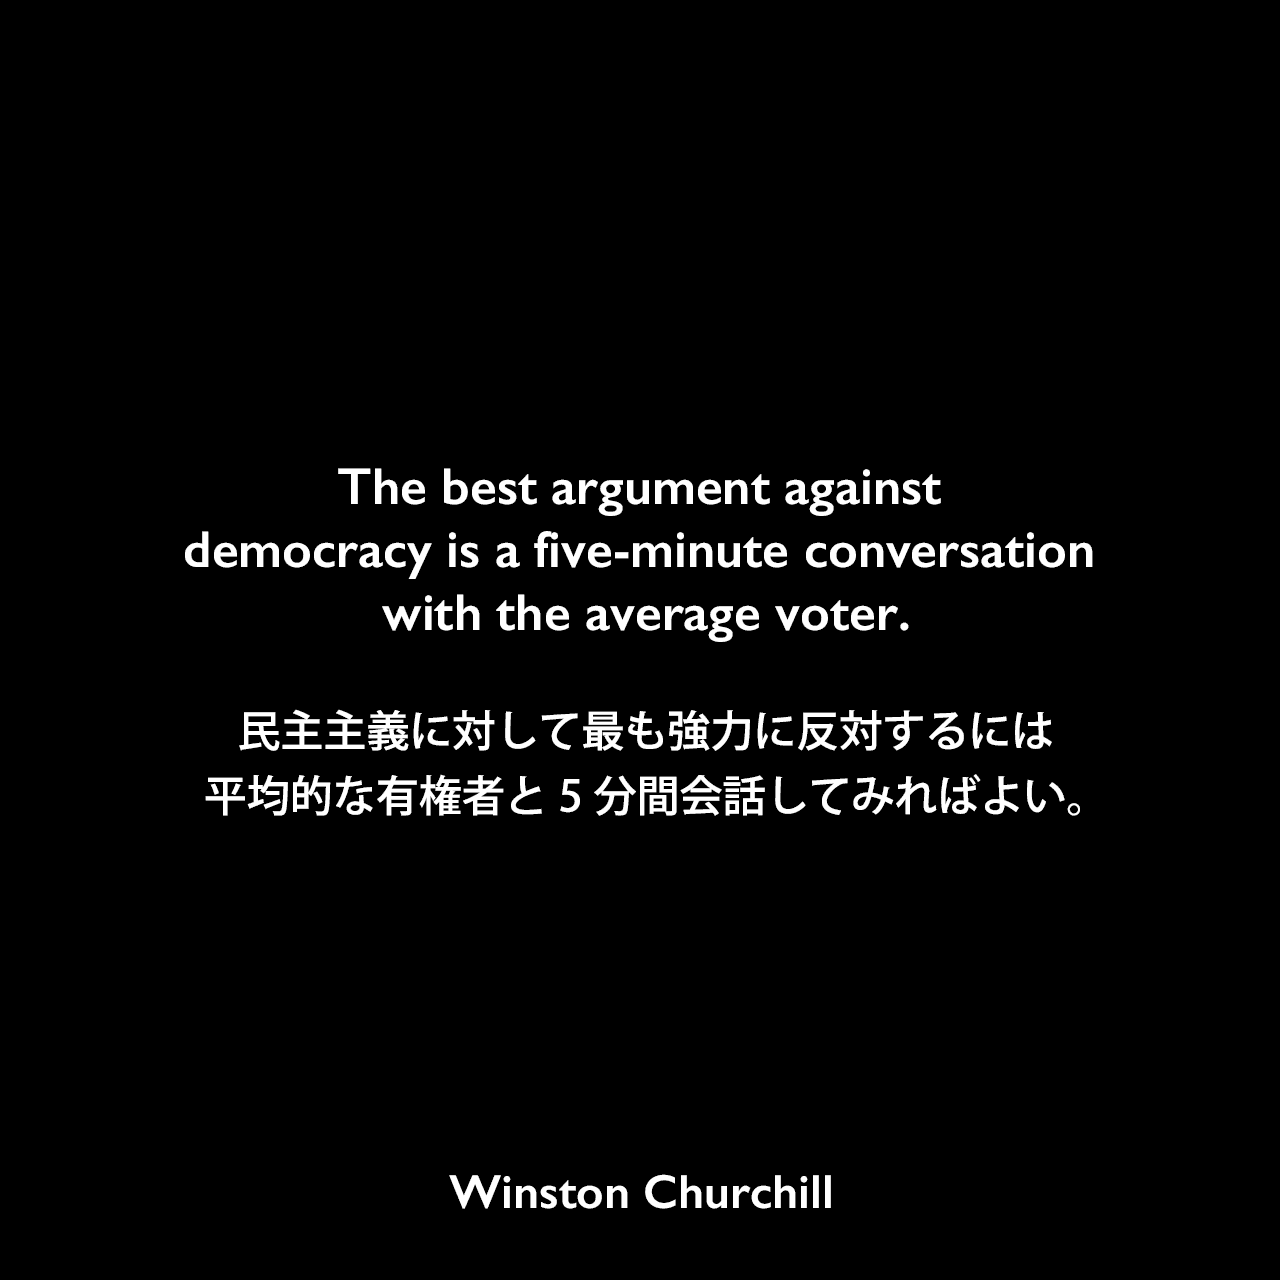 The best argument against democracy is a five-minute conversation with the average voter.民主主義に対して最も強力に反対するには、平均的な有権者と5分間会話してみればよい。Winston Churchill